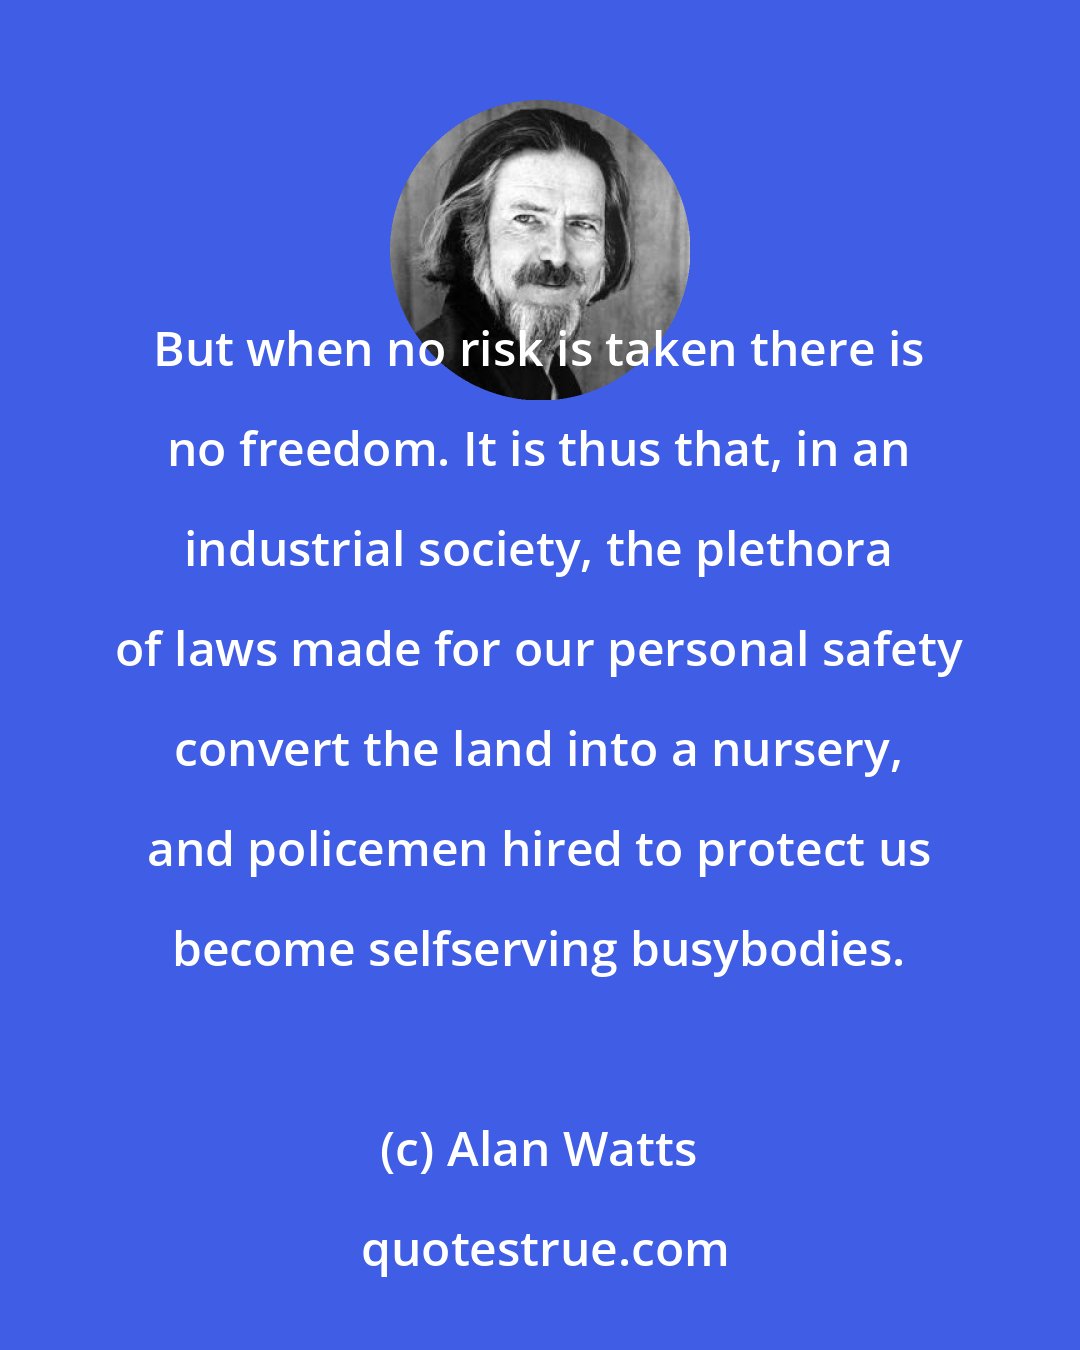 Alan Watts: But when no risk is taken there is no freedom. It is thus that, in an industrial society, the plethora of laws made for our personal safety convert the land into a nursery, and policemen hired to protect us become selfserving busybodies.